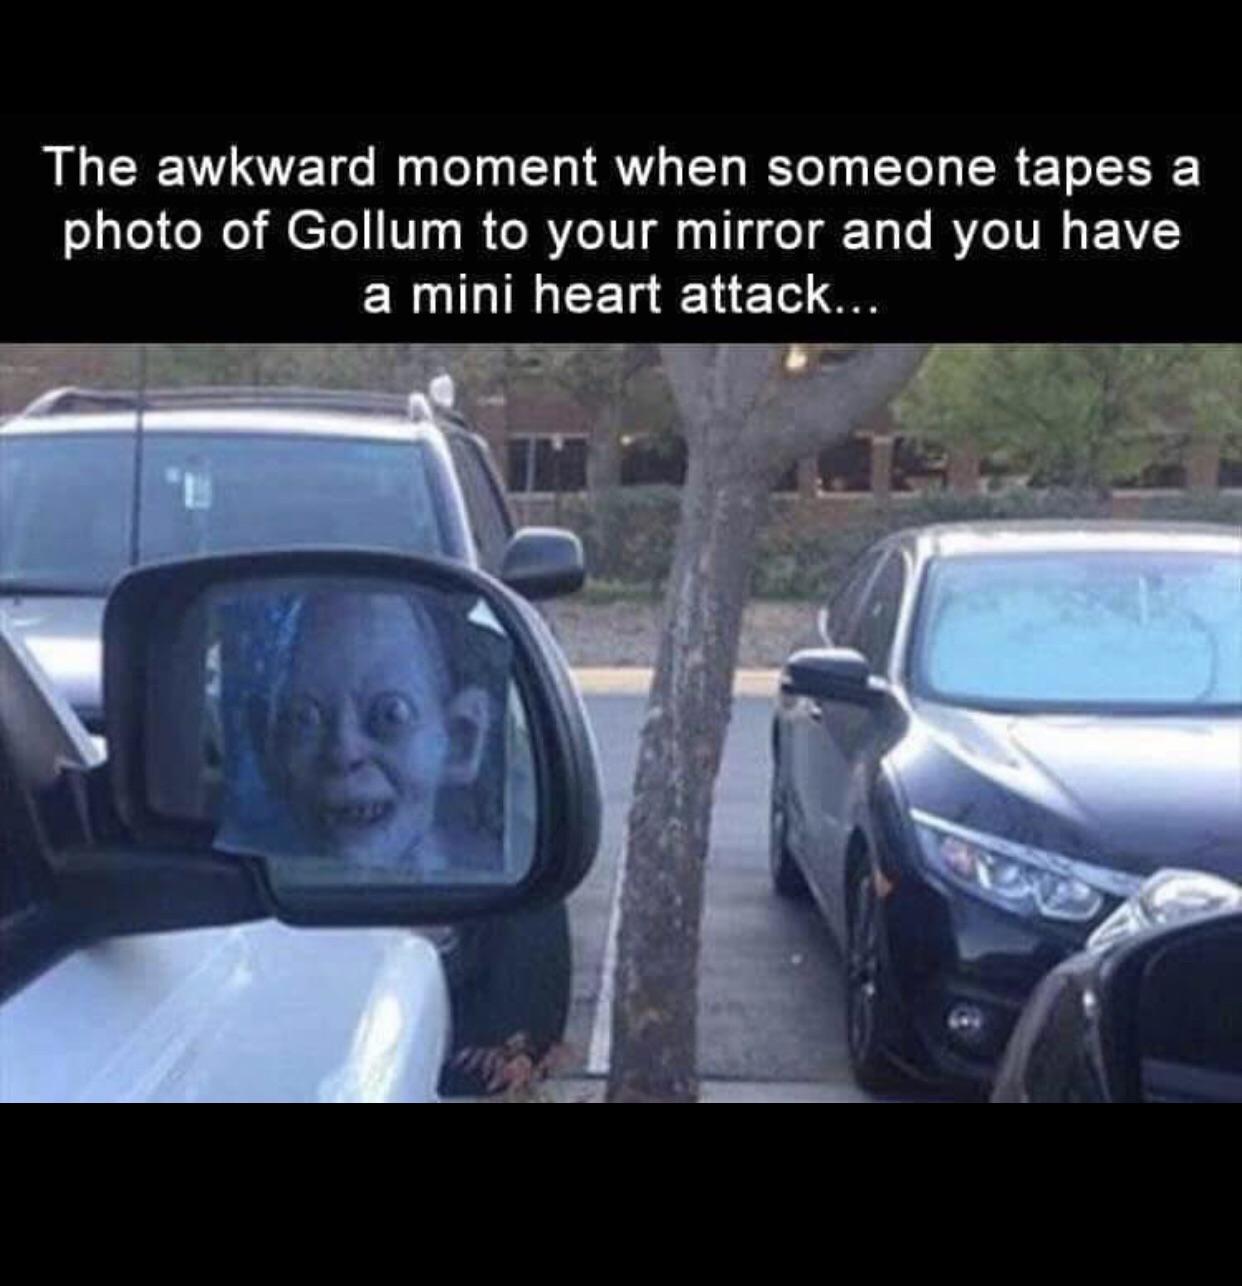 smeagol on mirror - The awkward moment when someone tapes a photo of Gollum to your mirror and you have a mini heart attack...